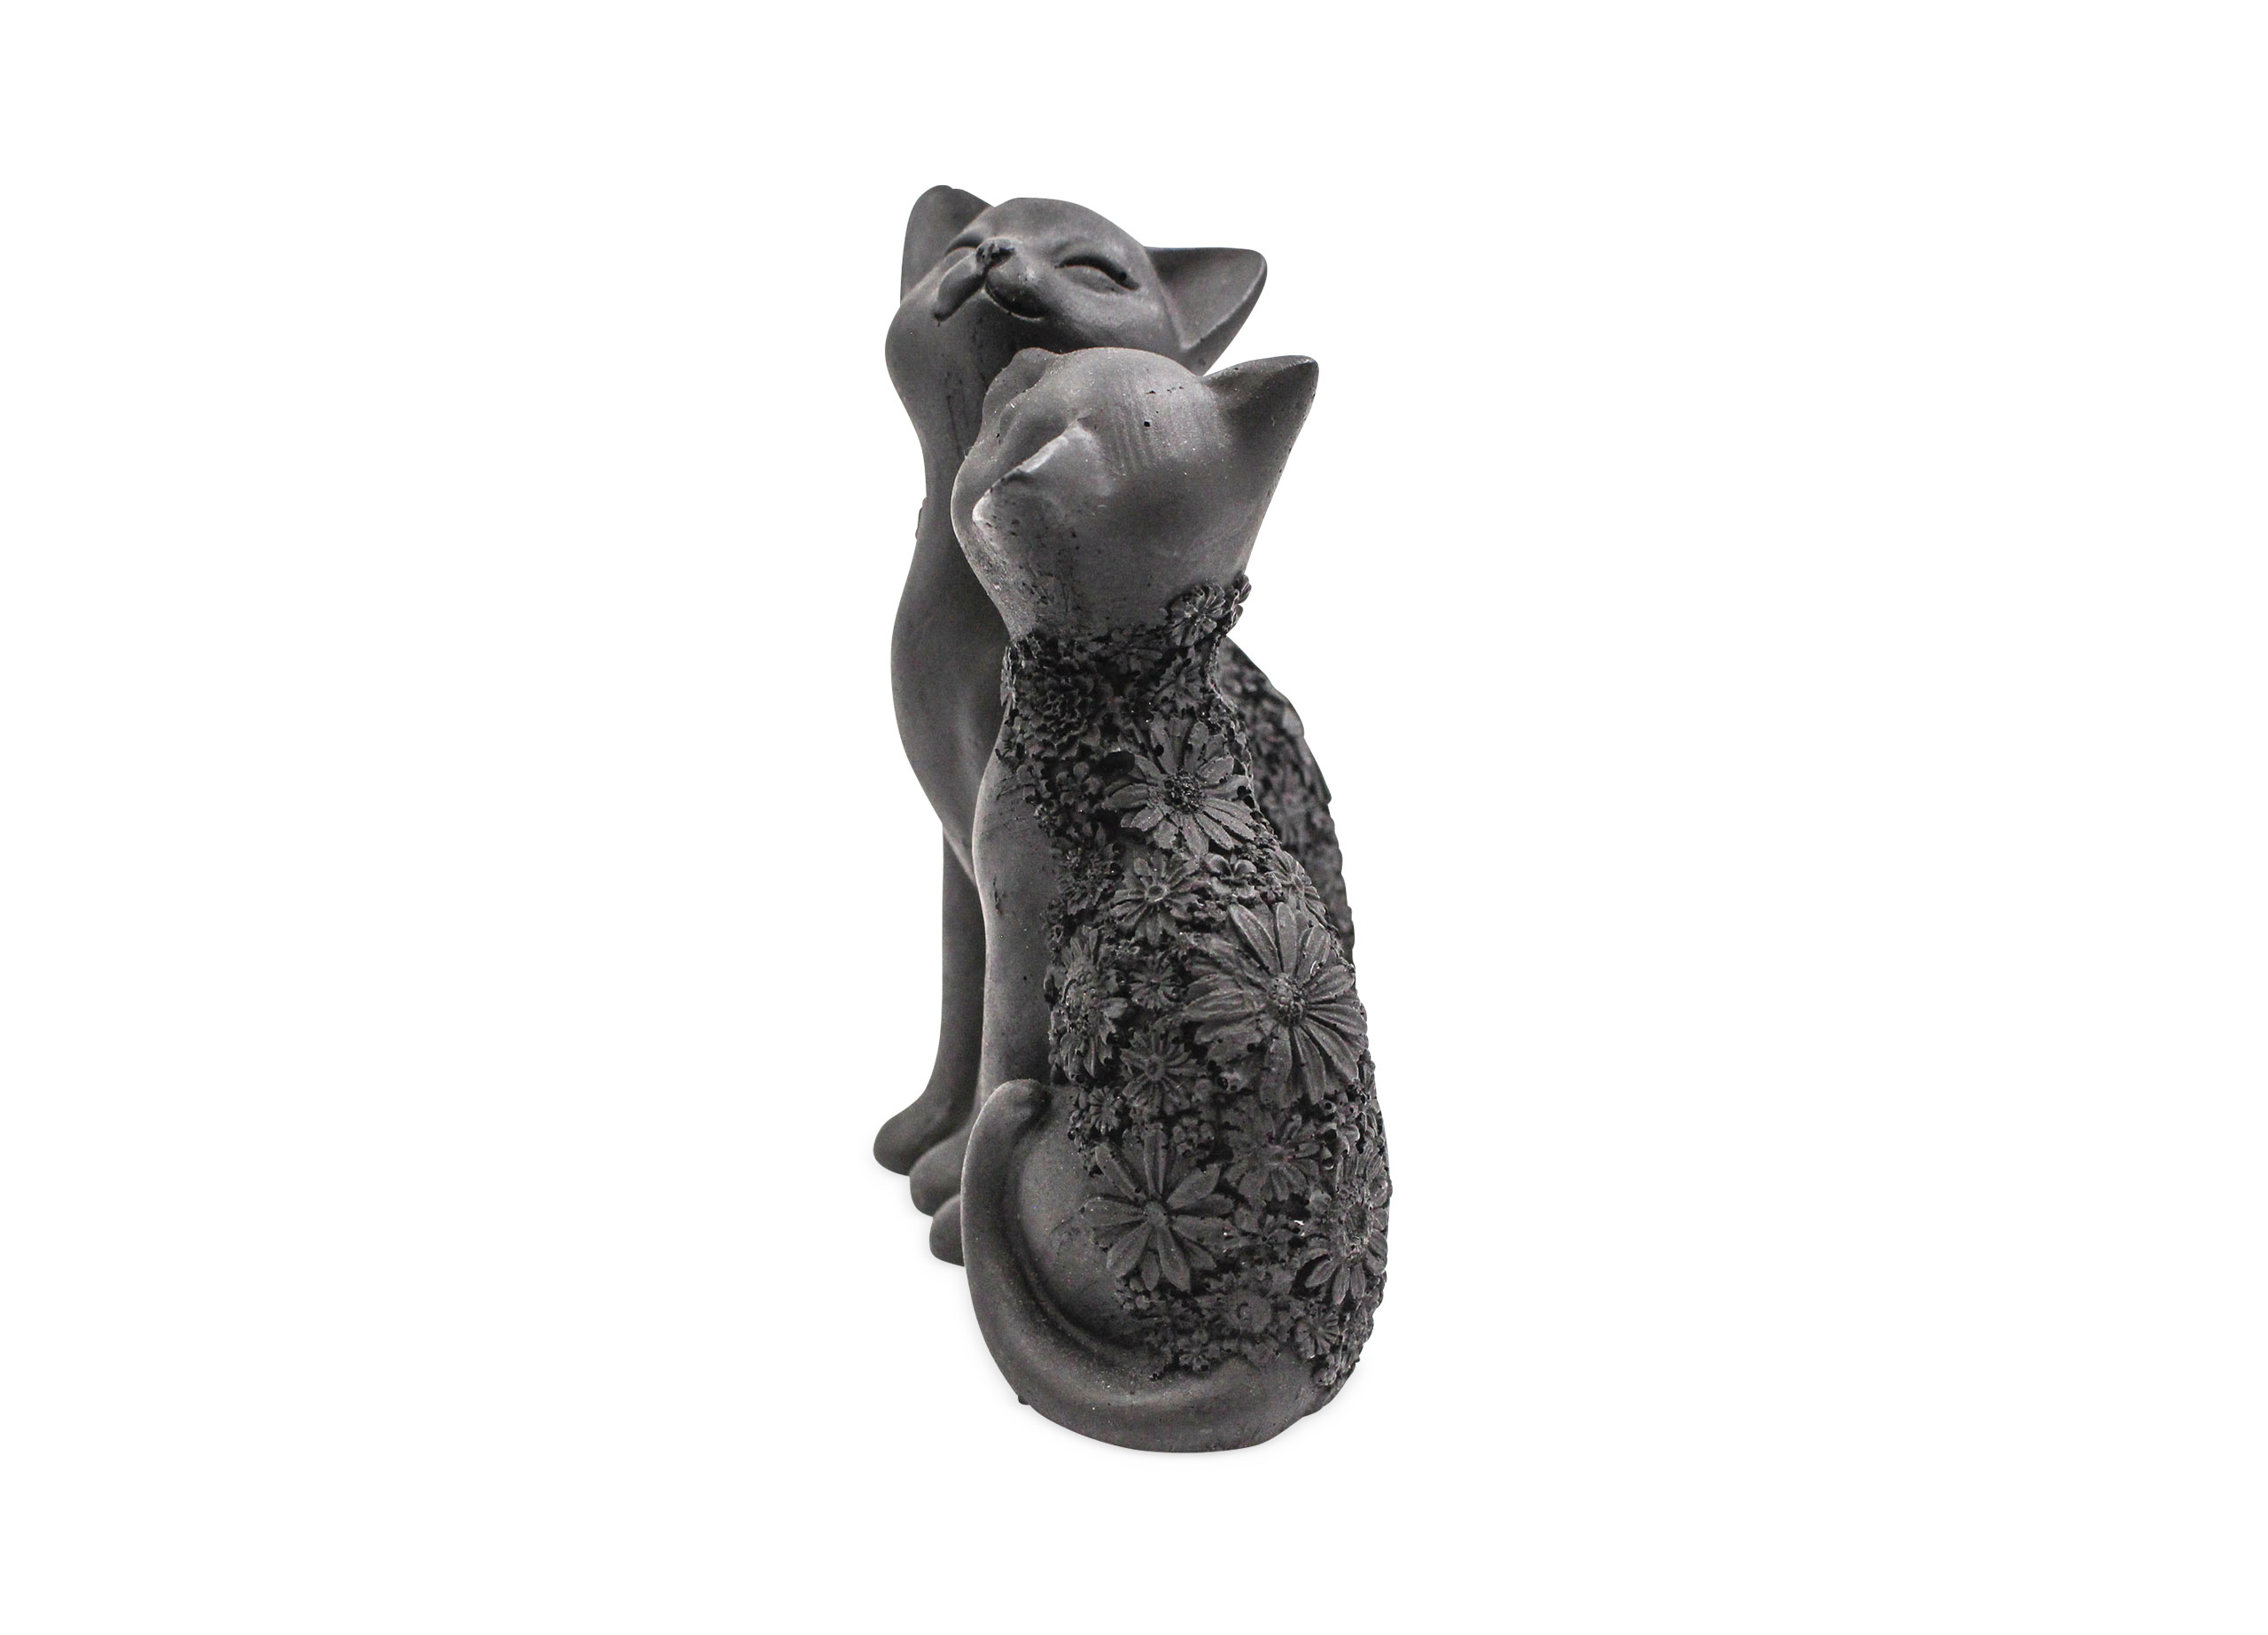 Shungite Figurines Chats Kittens (M) - Crystal Dreams